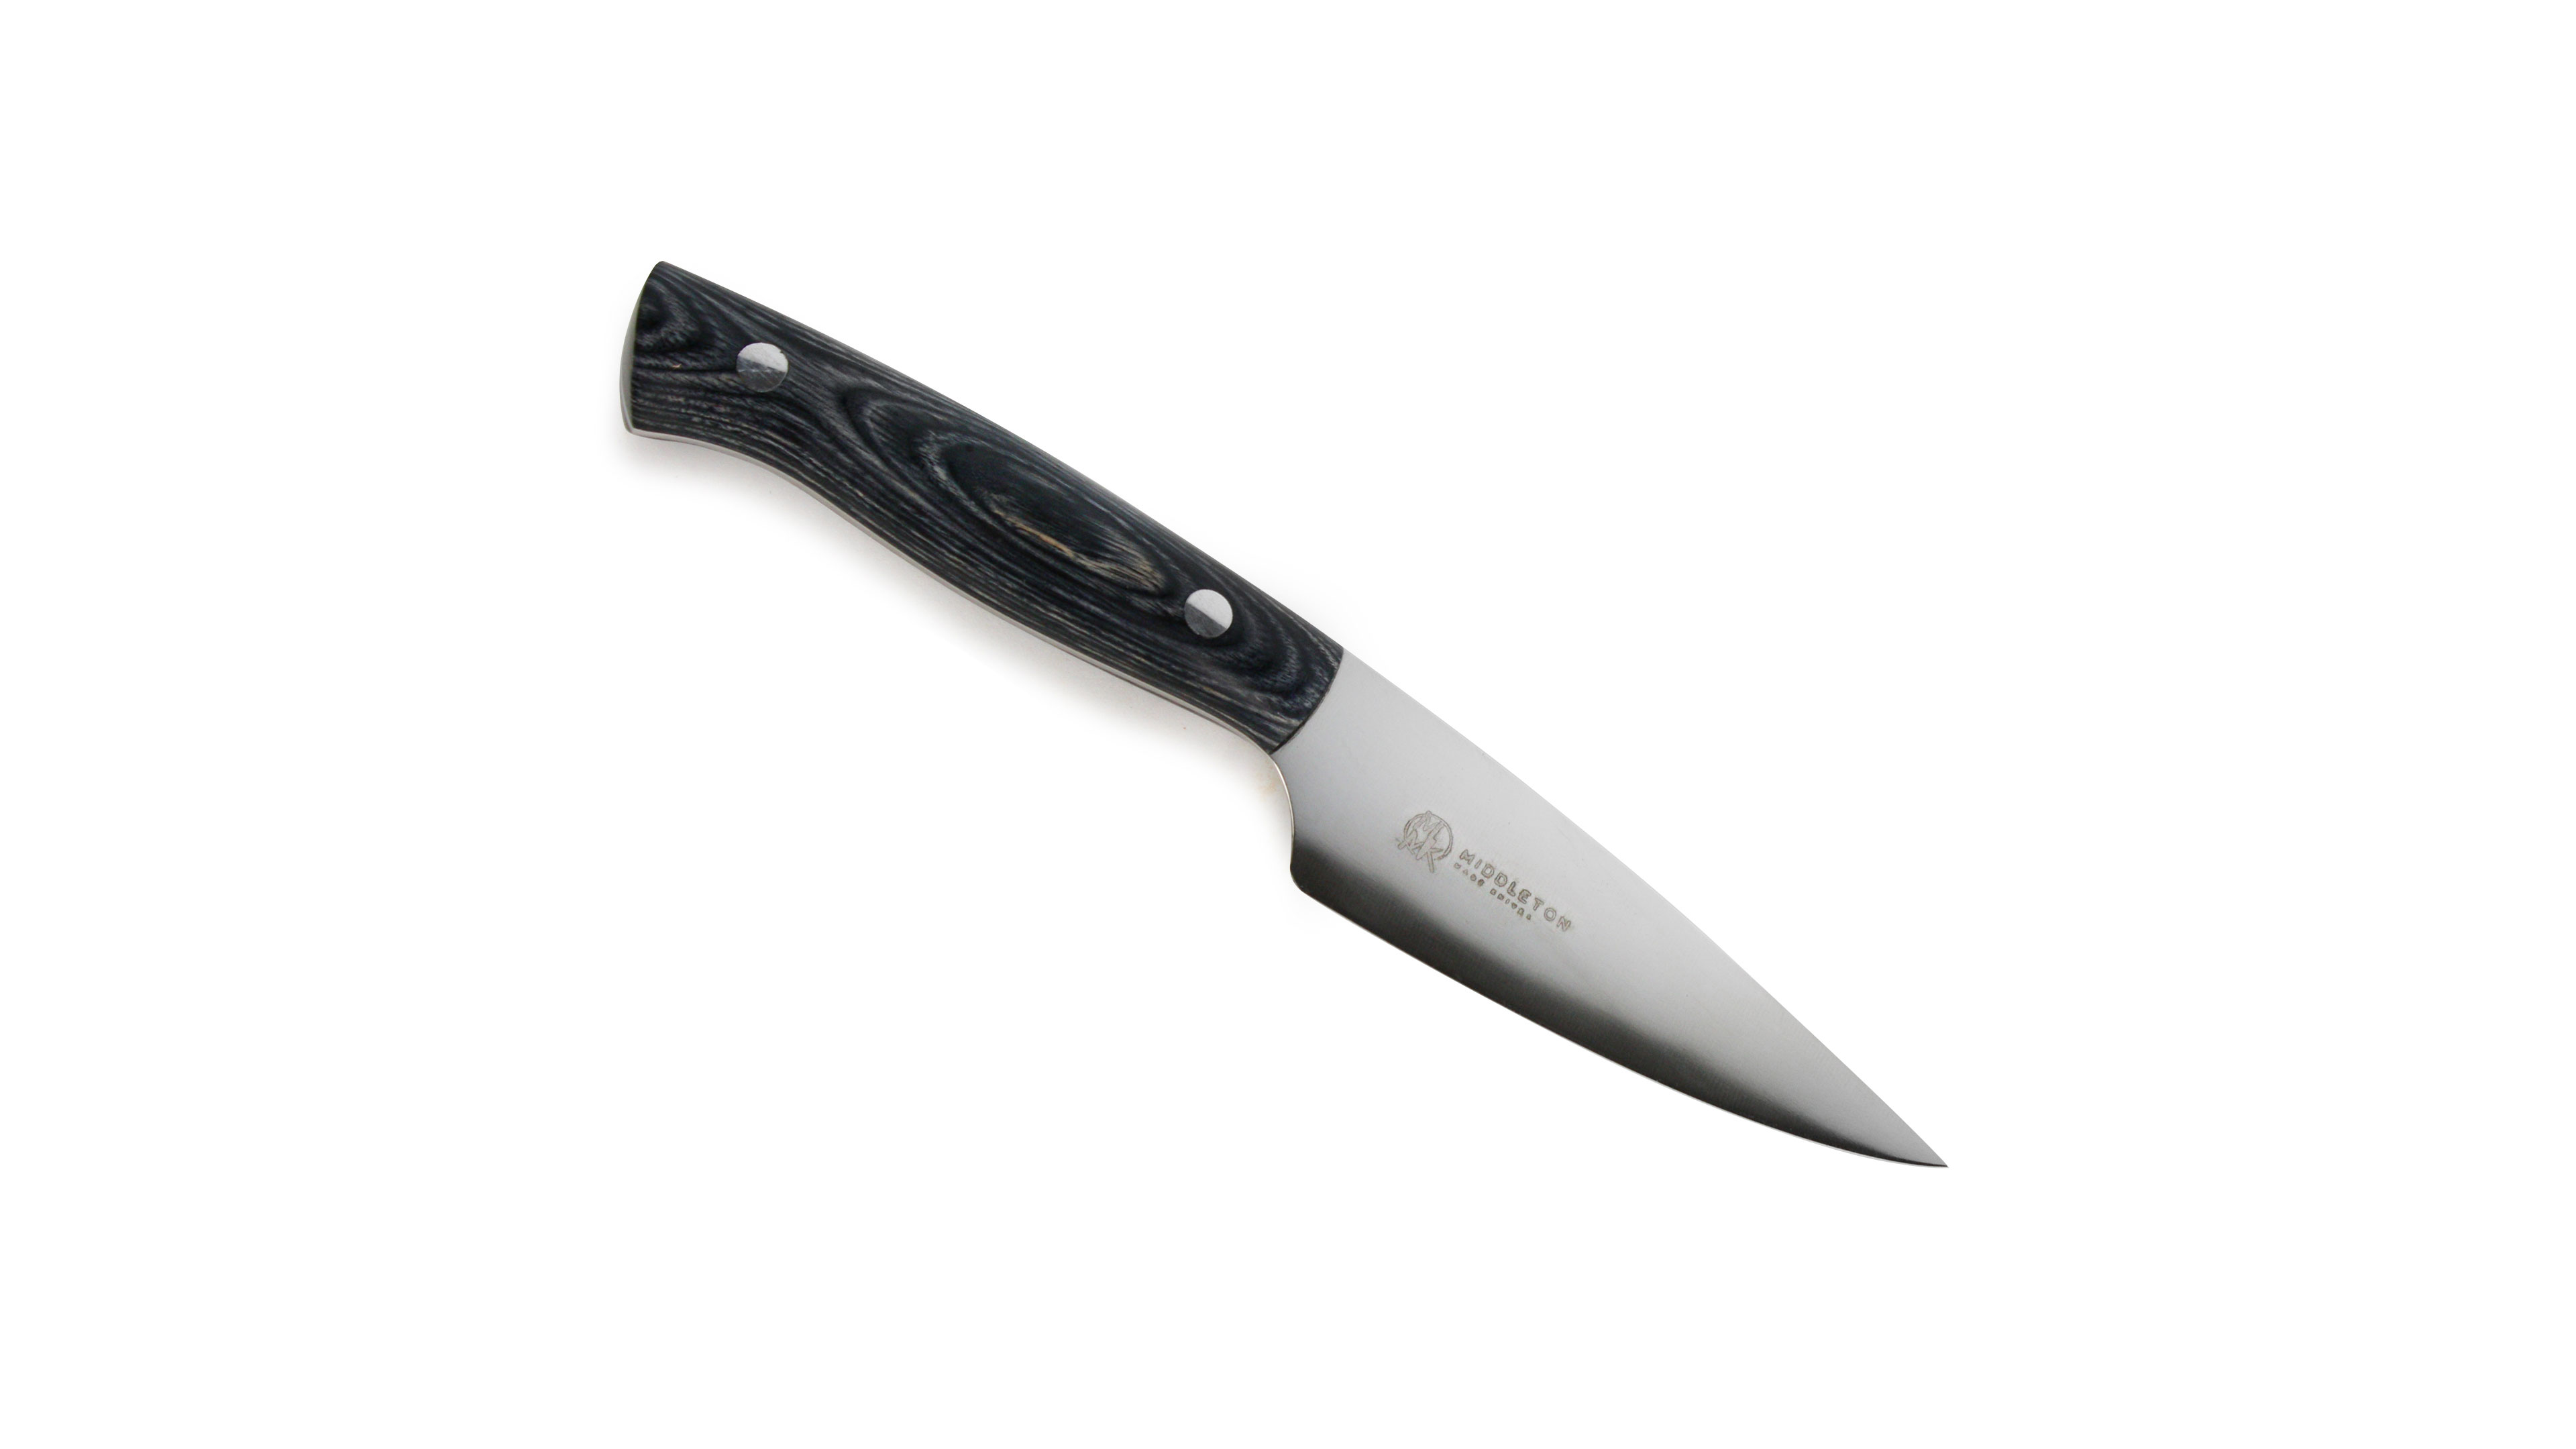 Middleton Made Knives Echo Paring Knife recommended by Burrfection • Kit